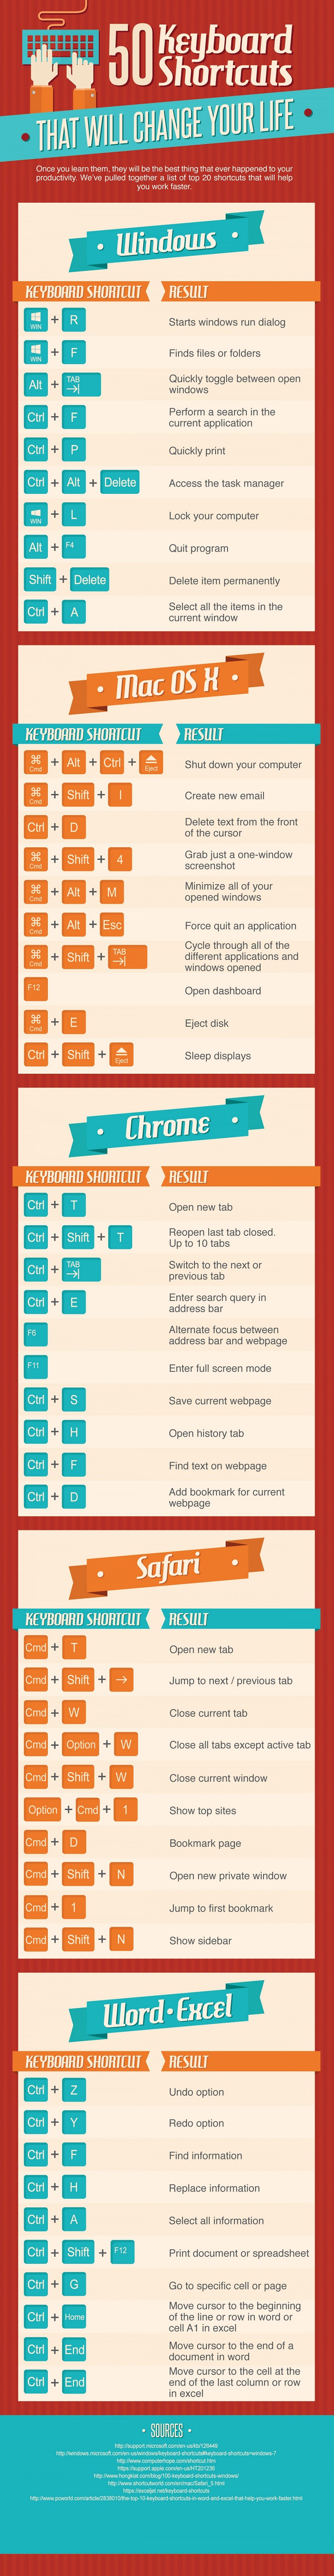 50 Keyboard Shortcuts to Make Your Life Easier